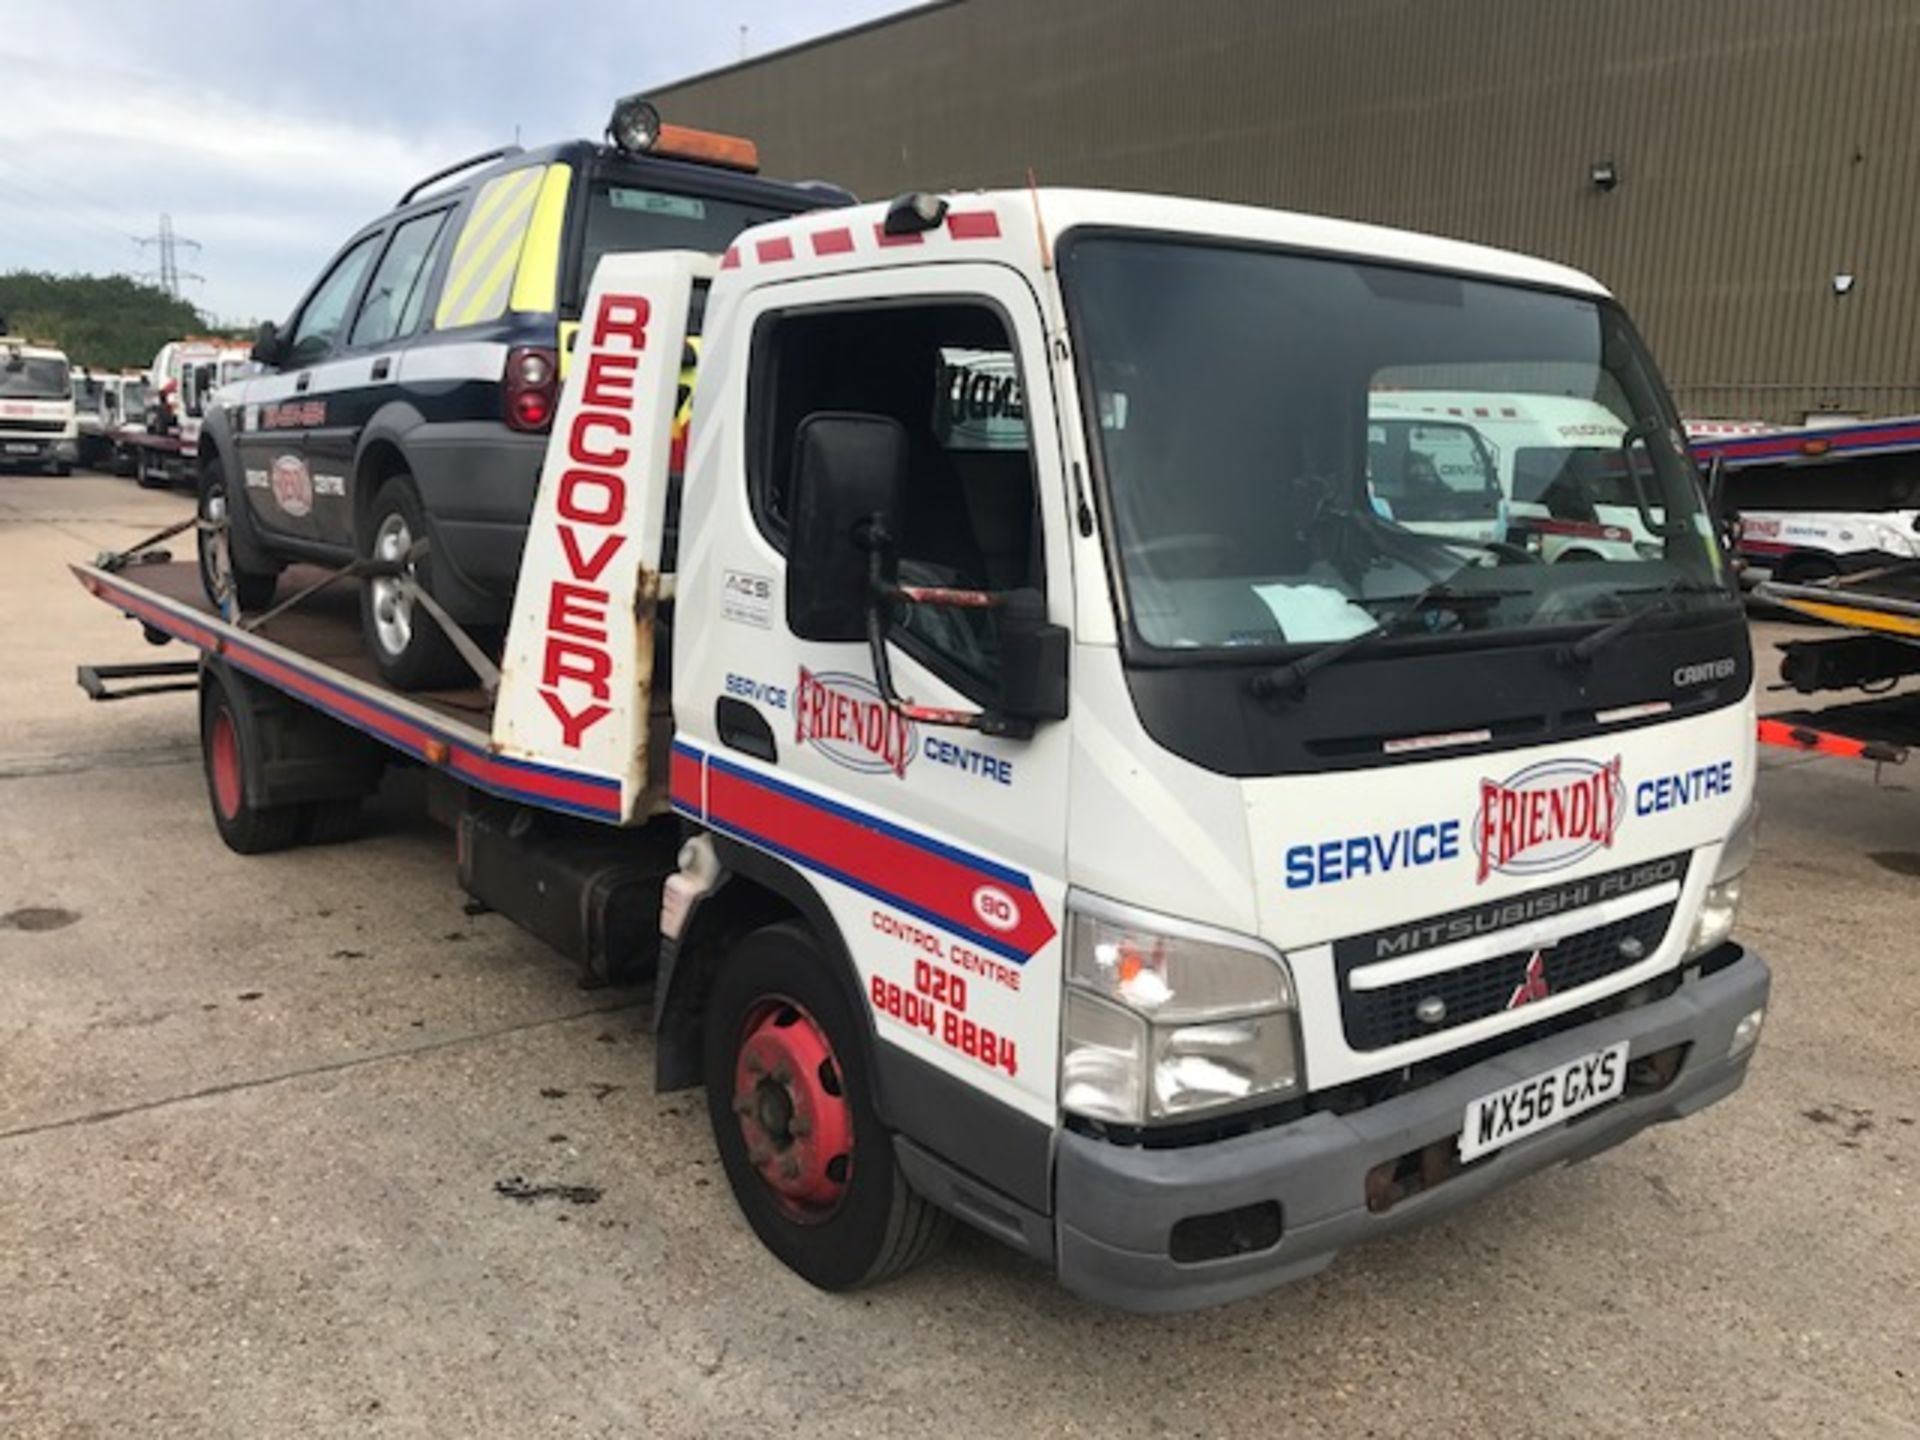 2006 Mitsubishi Fuso 7.5T tilt and slide breakdown recovery vehicle complete with Pro-Build